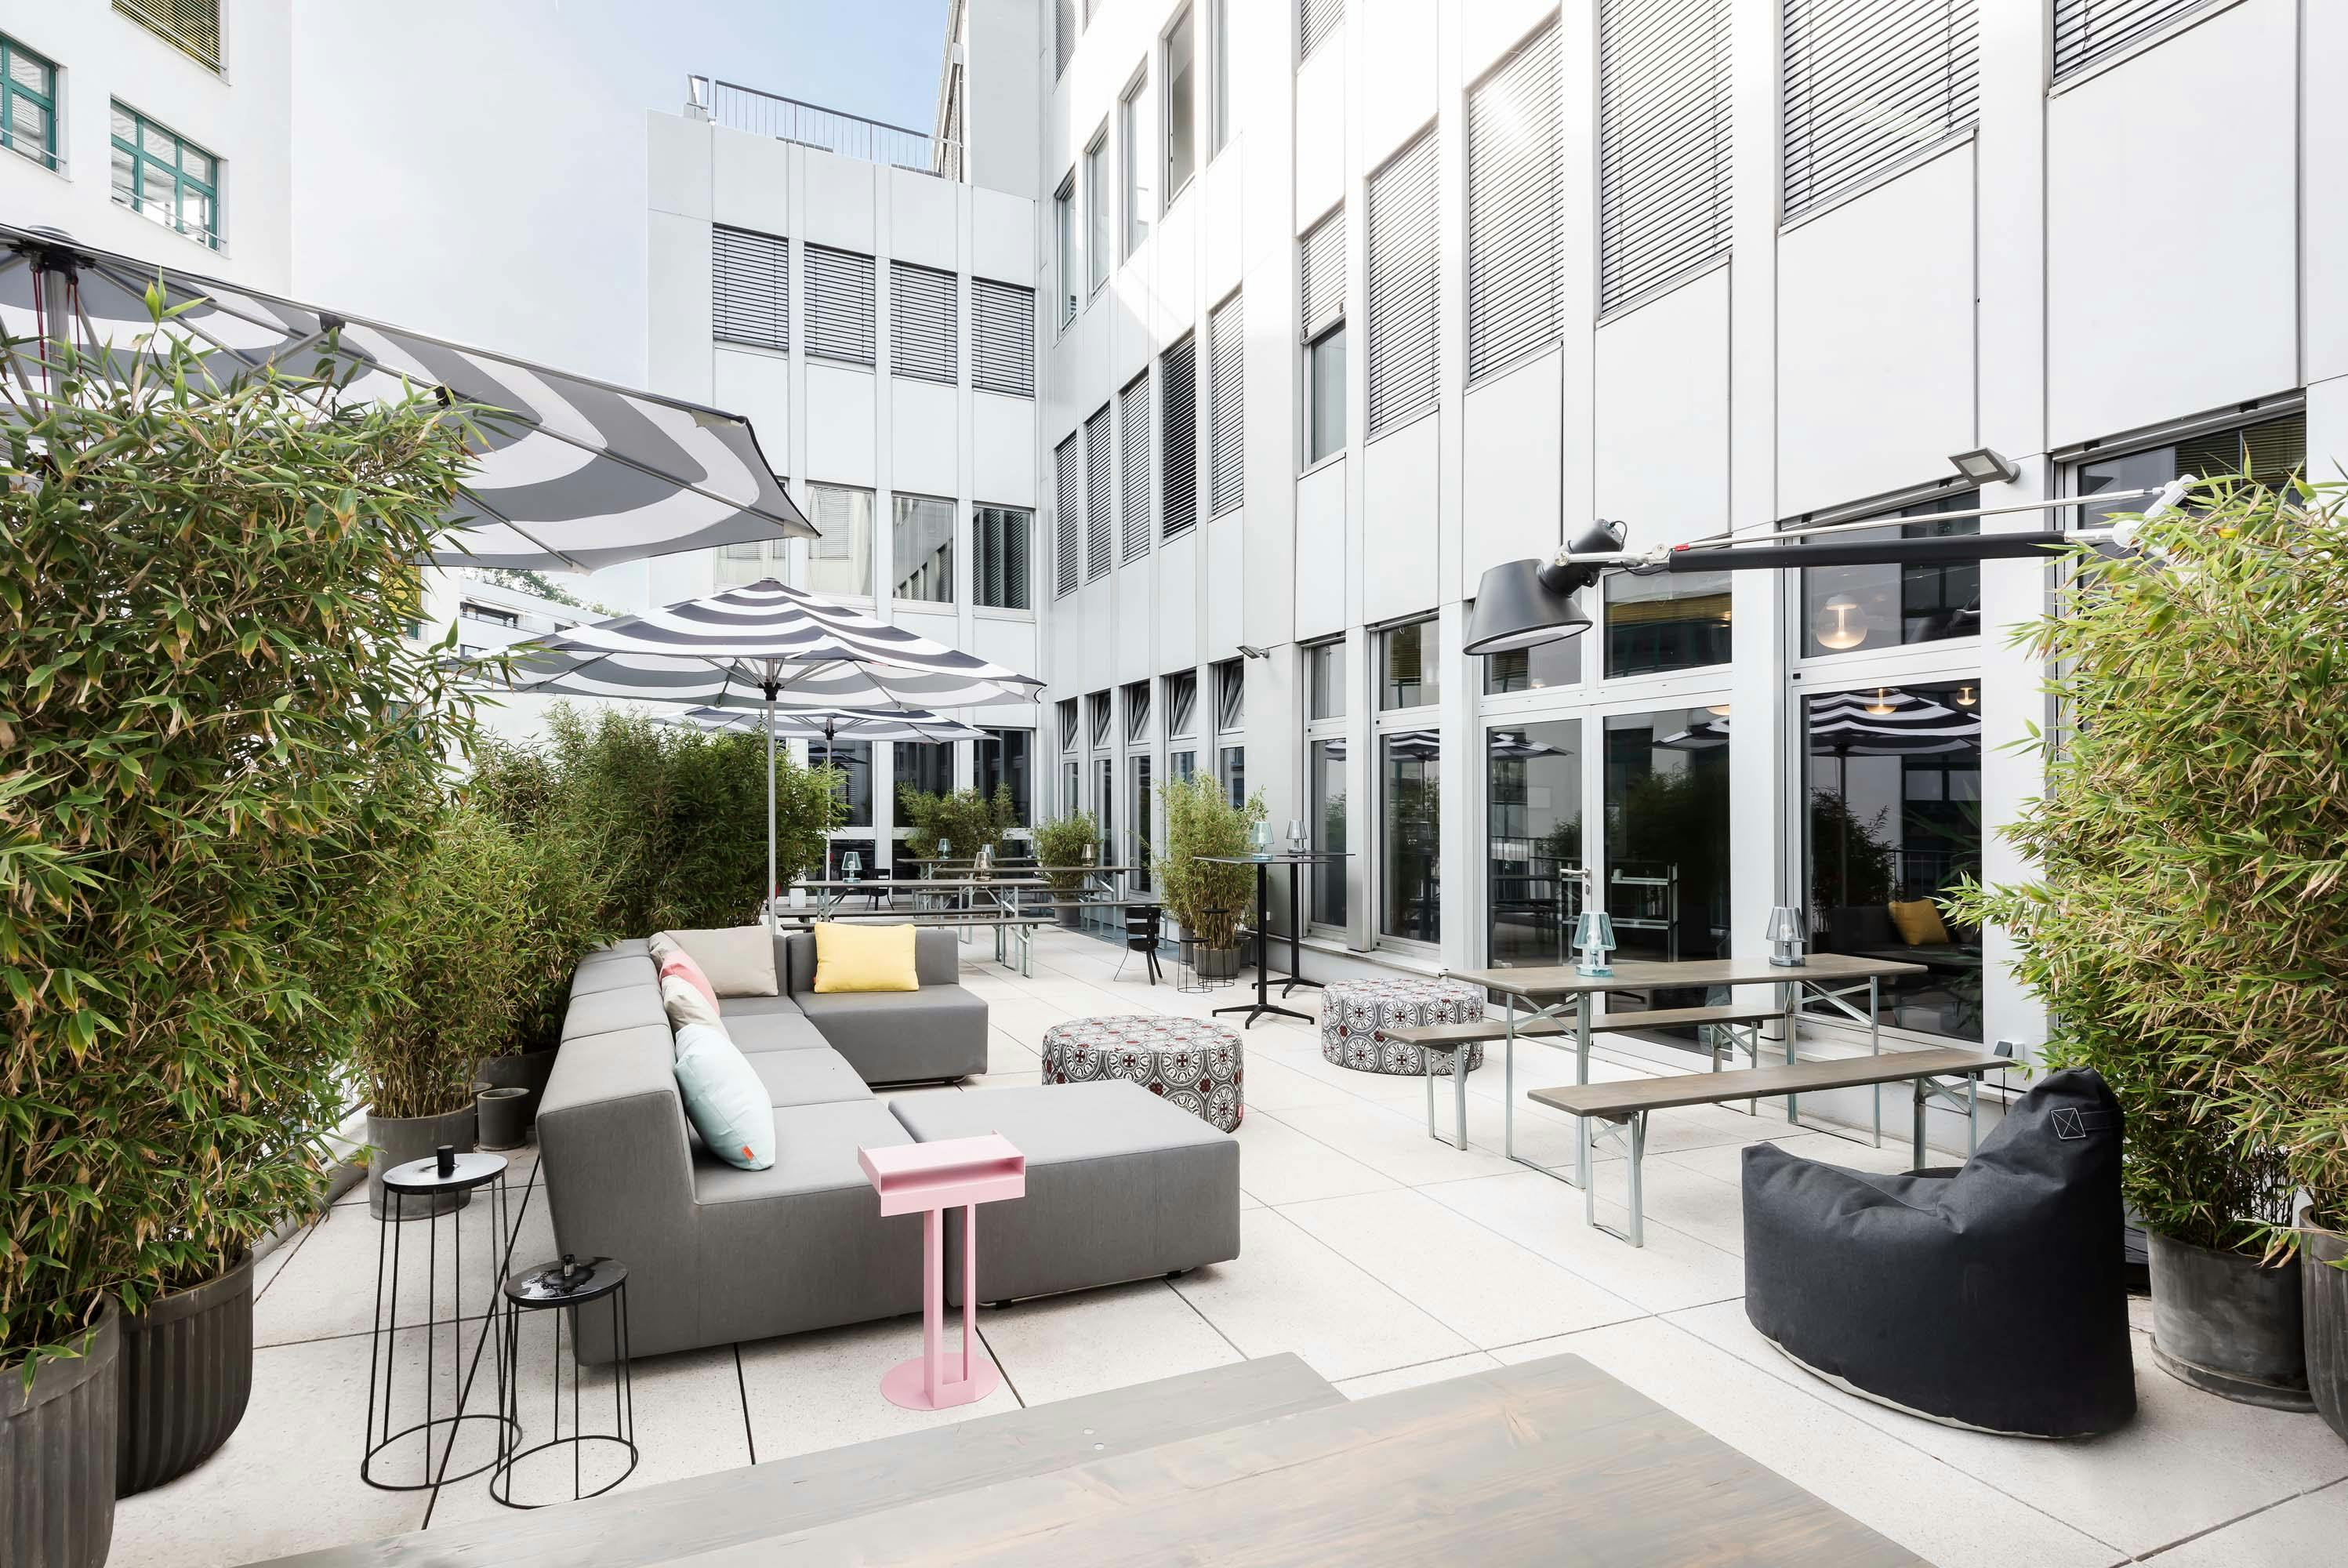 Download Presse Outdoor Space 2 © Design Offices